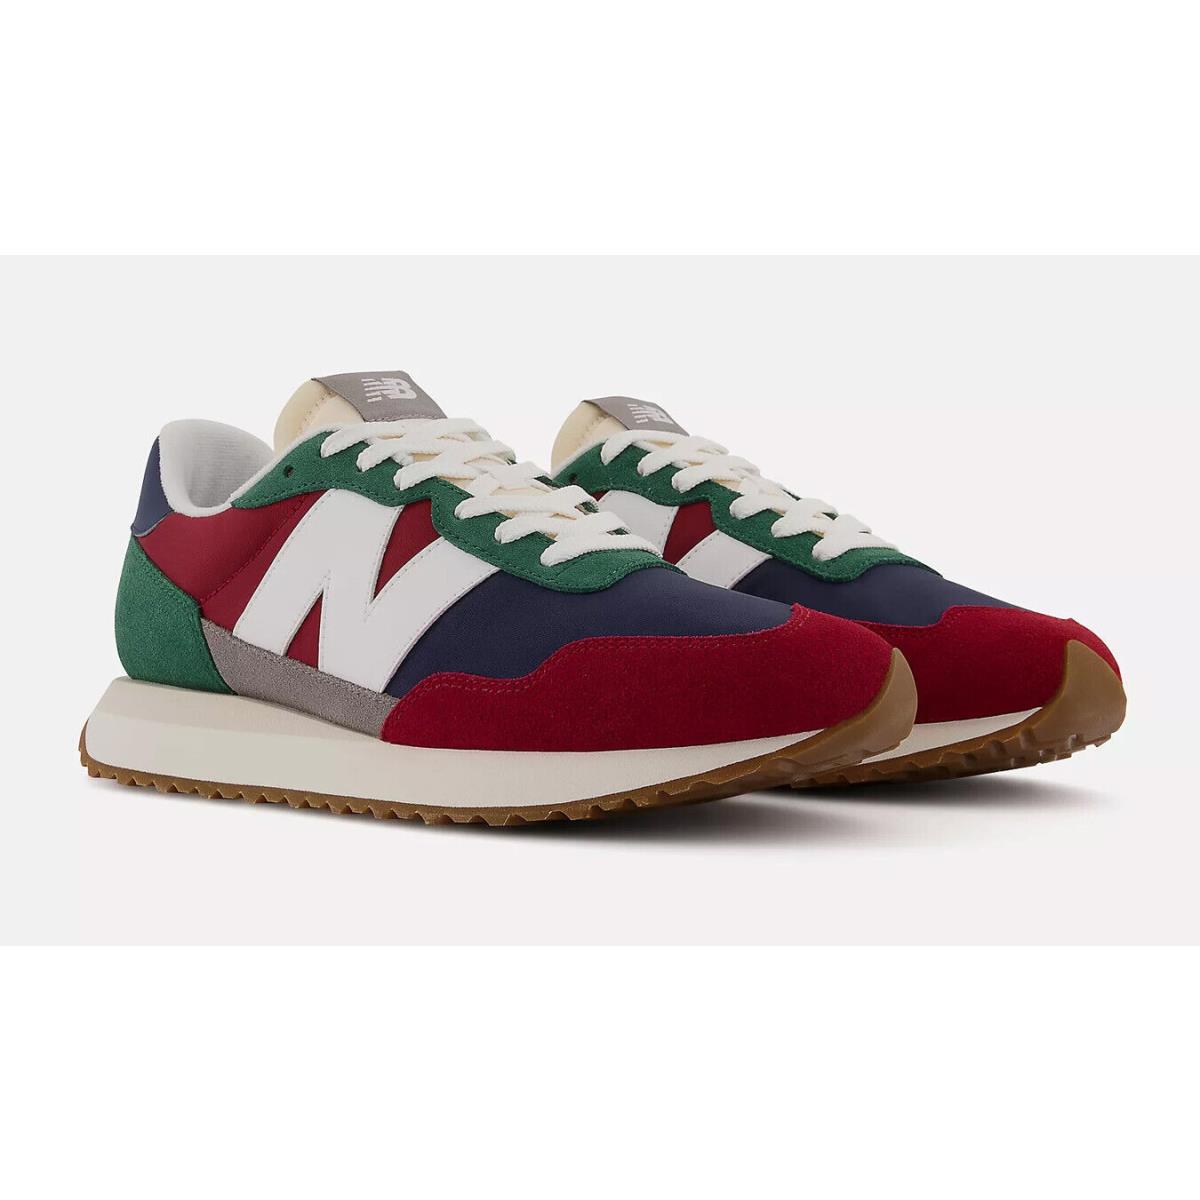 New Balance shoes  - Red/Green/Navy Blue 5